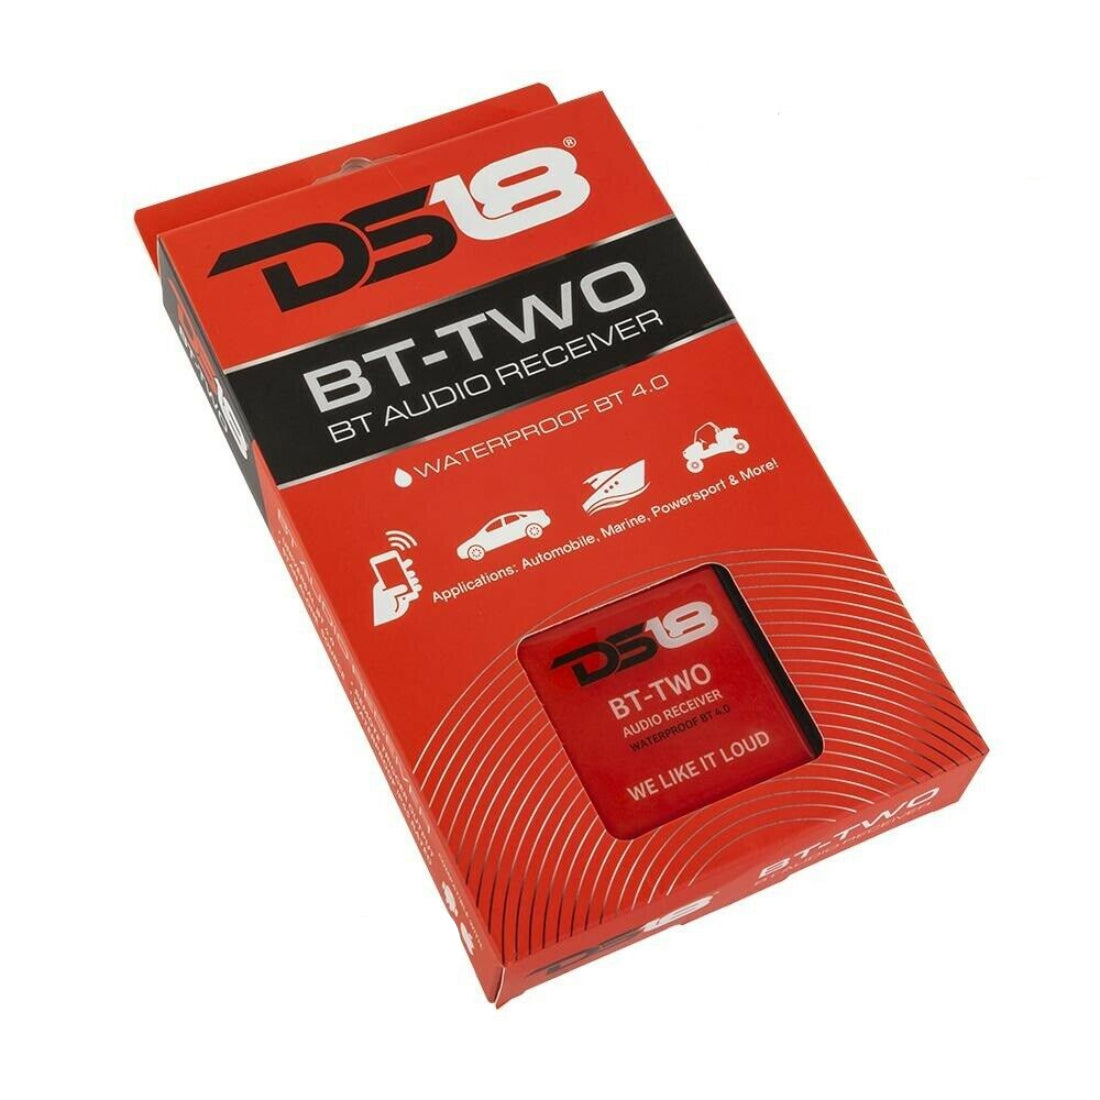 DS18 BT-TWO Bluetooth Audio Receiver Marine Car Boat Motorcycle Converter Stream